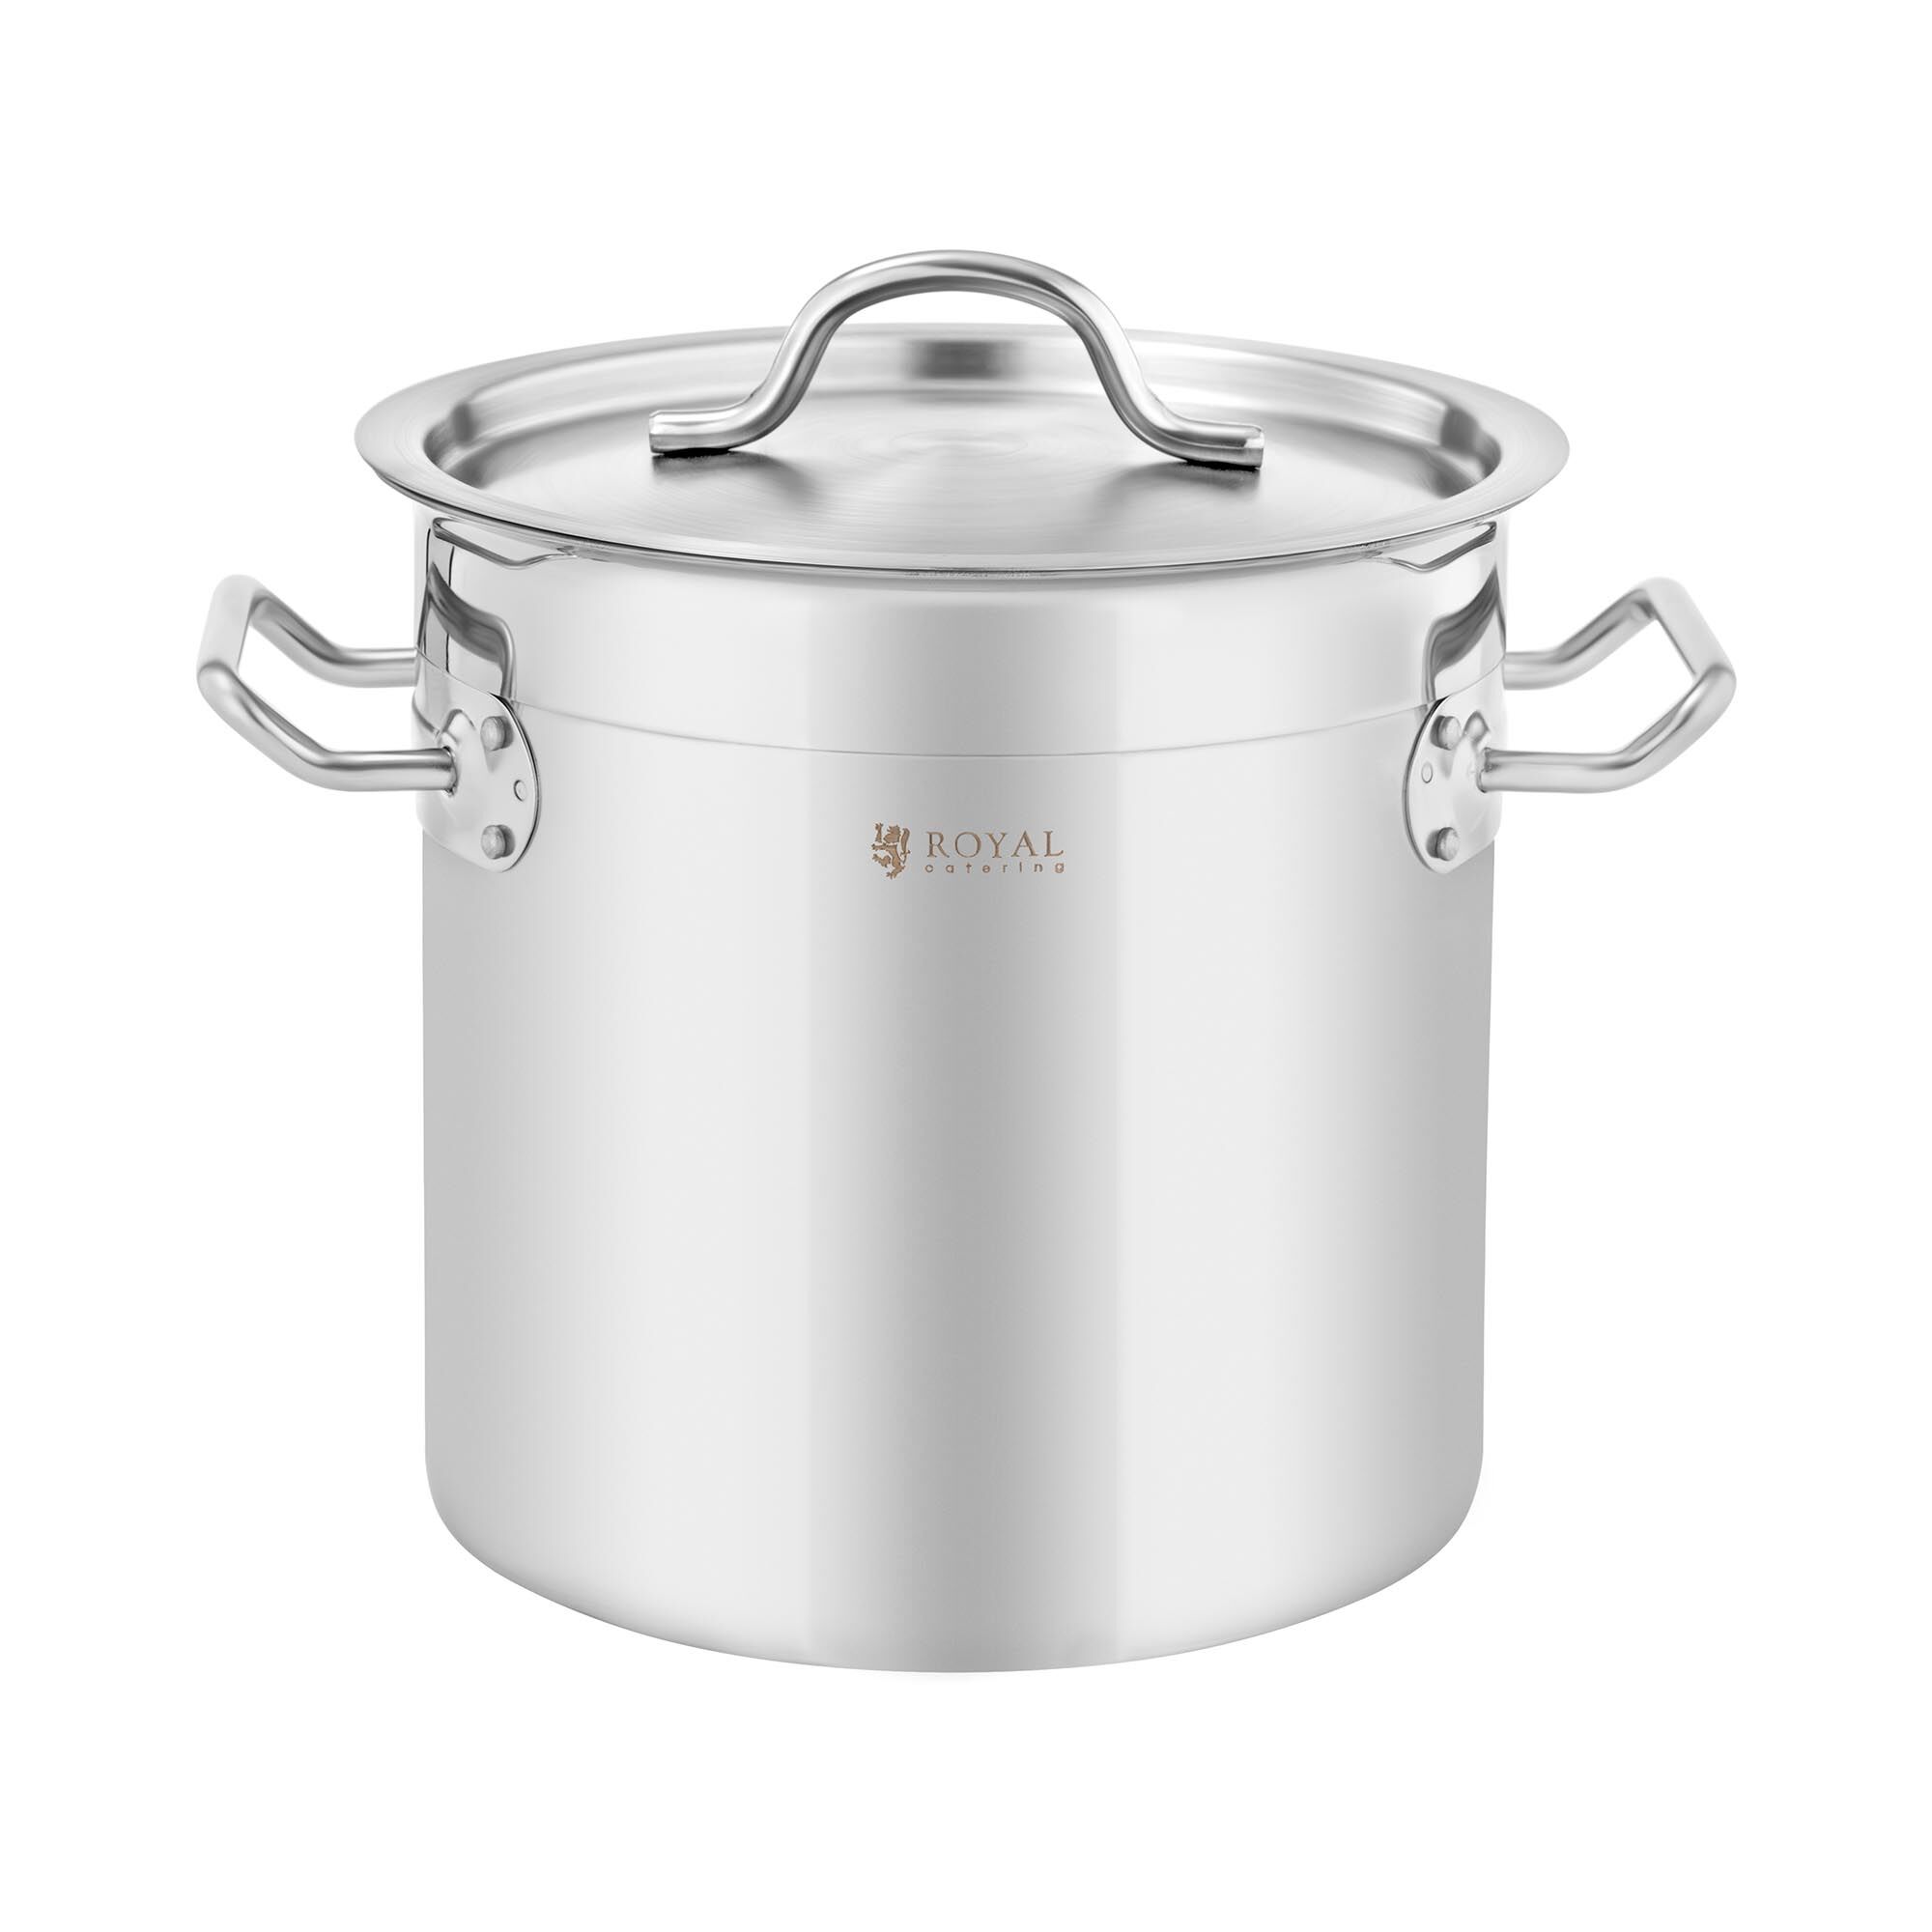 Royal Catering Induction Cooking Pot - 6 L - Royal Catering - 200 mm